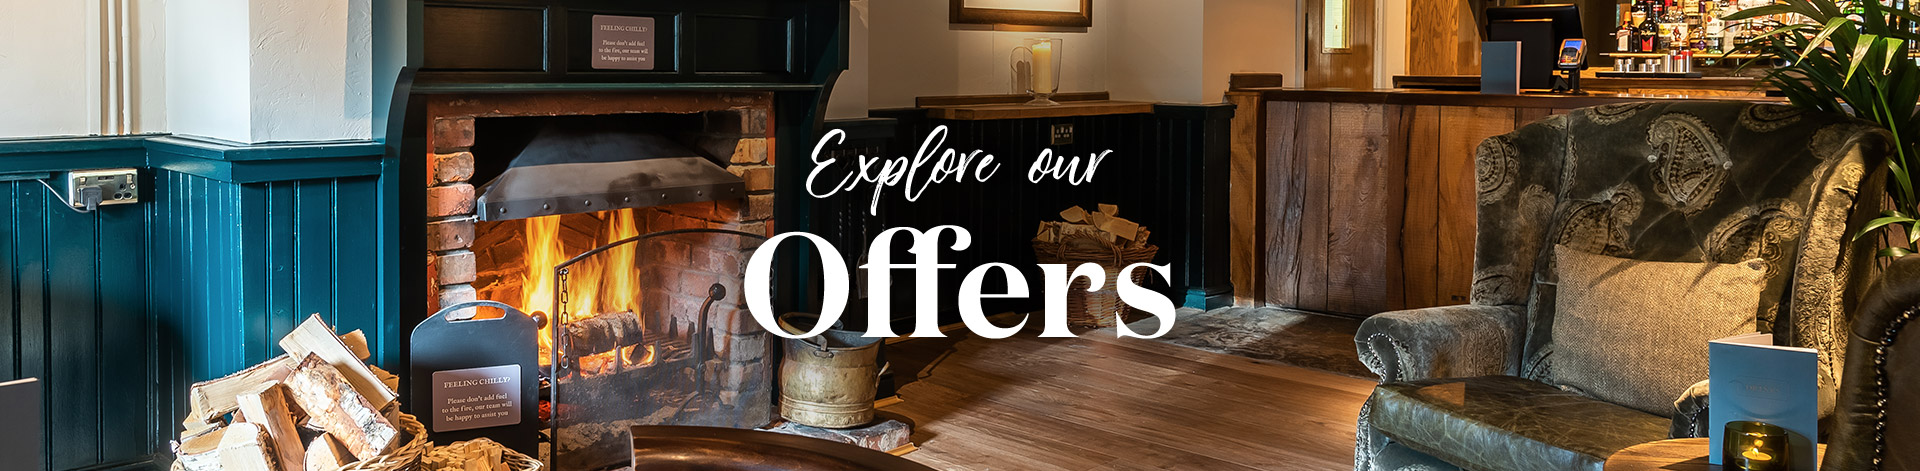 Our latest offers at The Captain's Wife